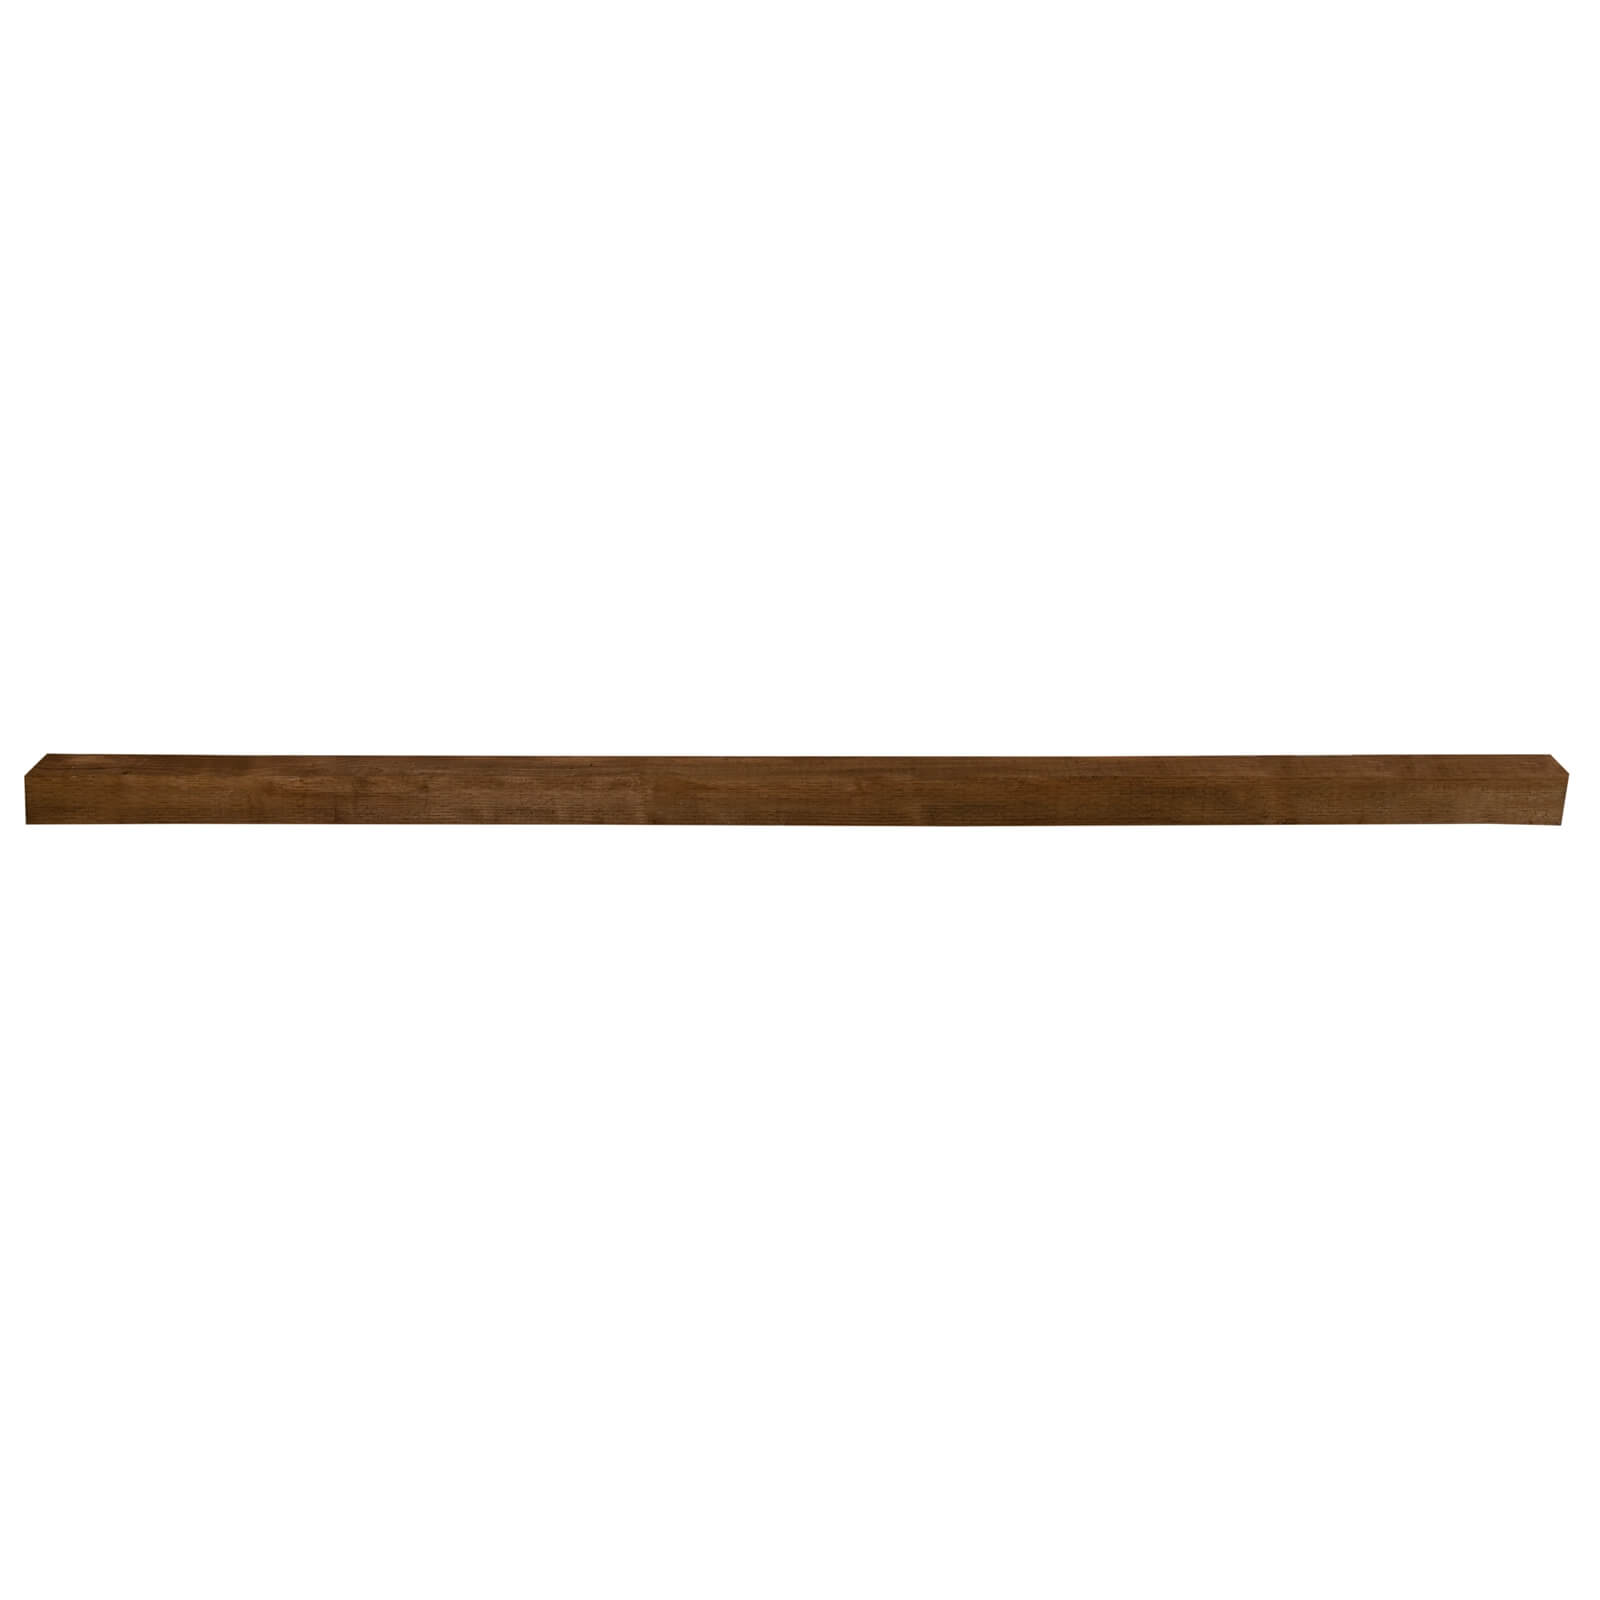 Brown Incised Fence Post 2.4m (2400 x 75 x 75mm) - Pack of 5